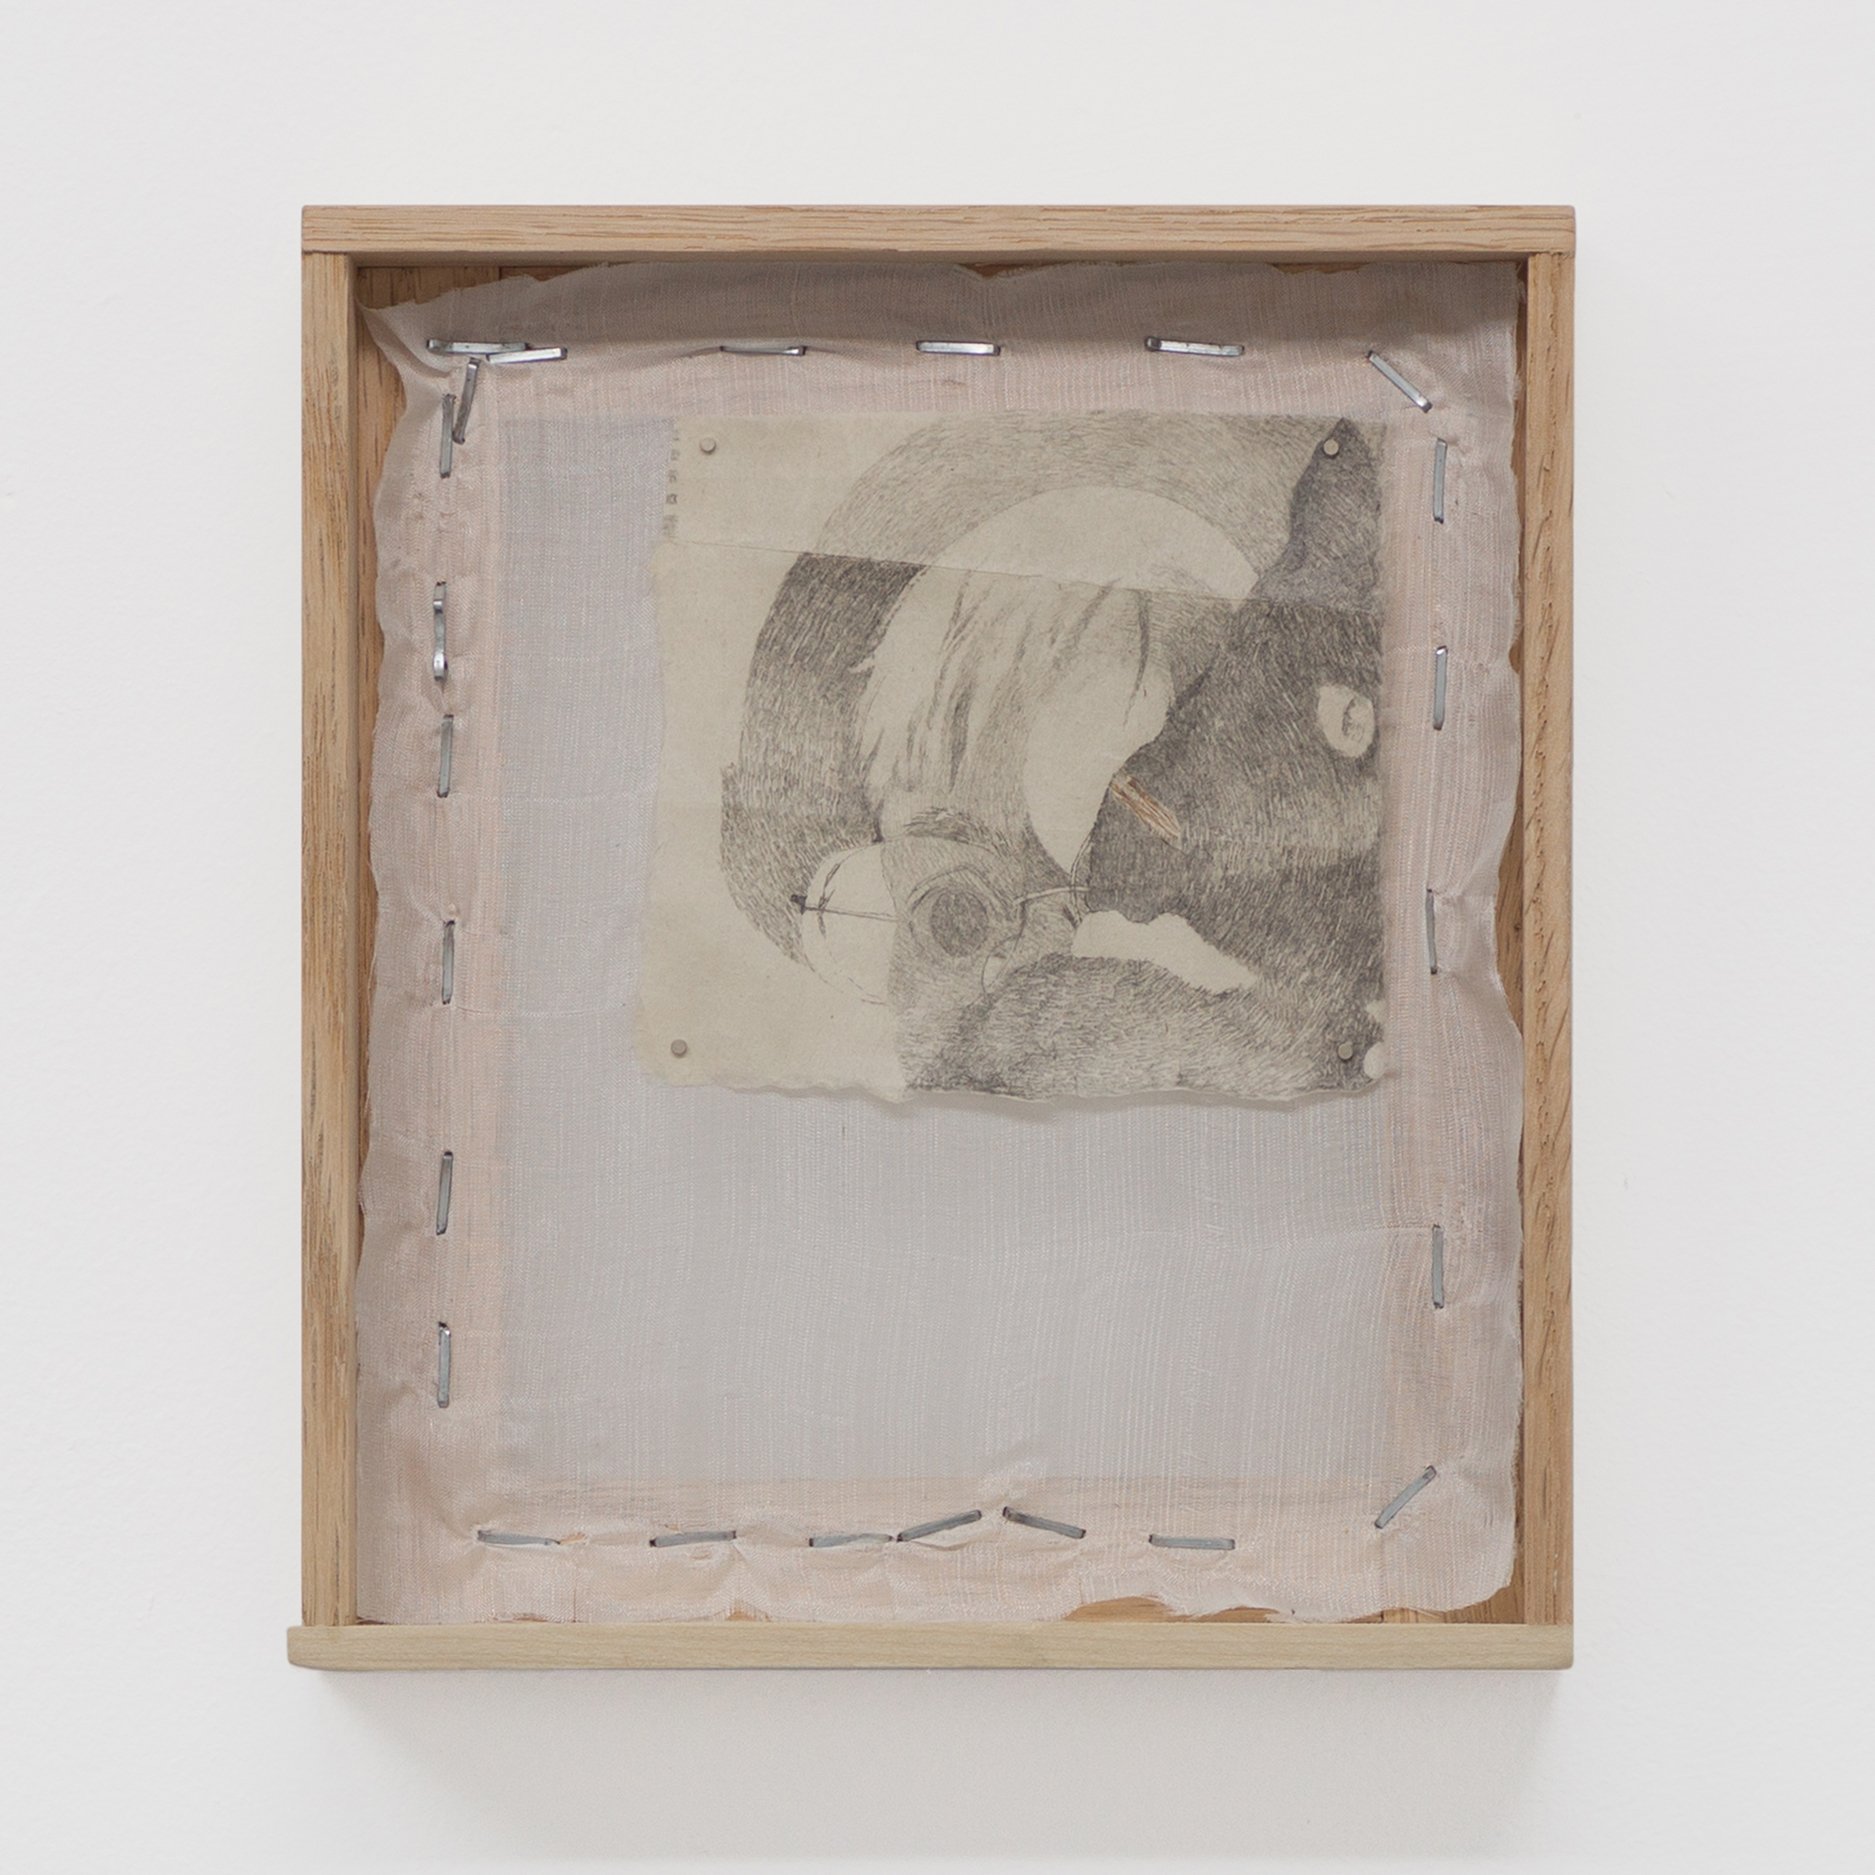   Seb and Roux (1),  2021. Pencil on found antique paper in artist frame. 7.375 x 6.5 inches. 